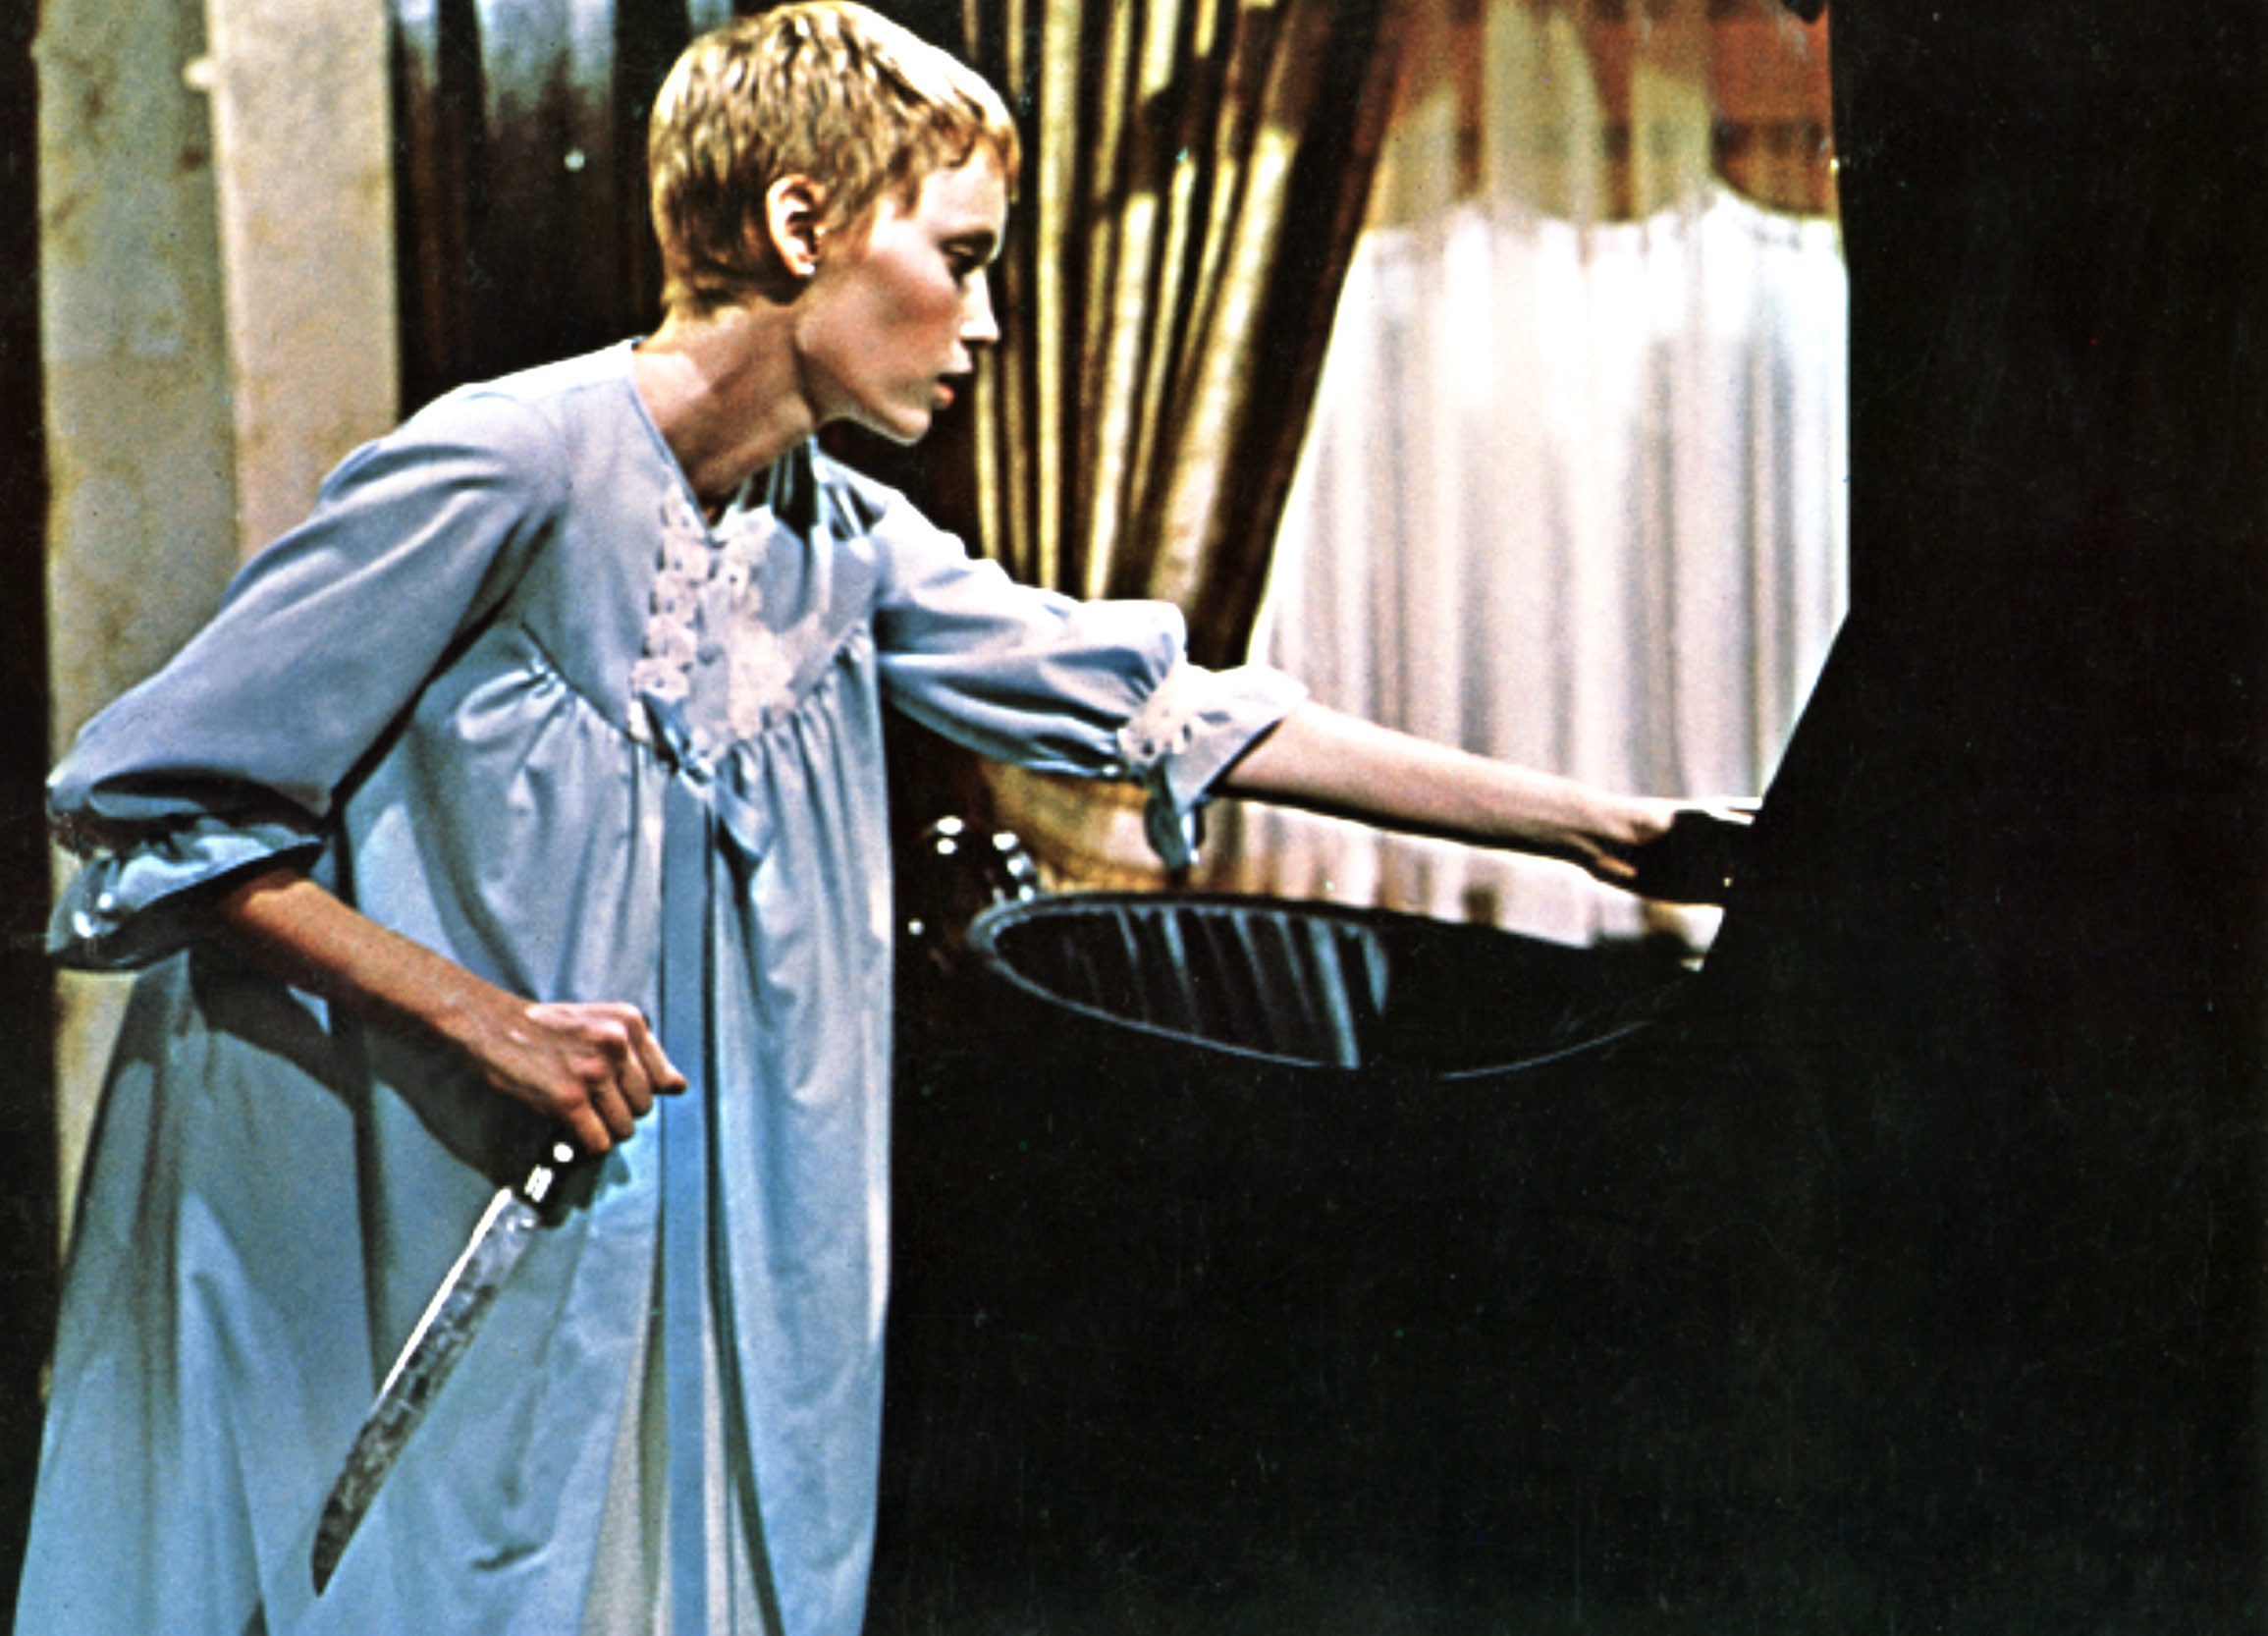 Mia Farrow holds a knife and approaches a crib